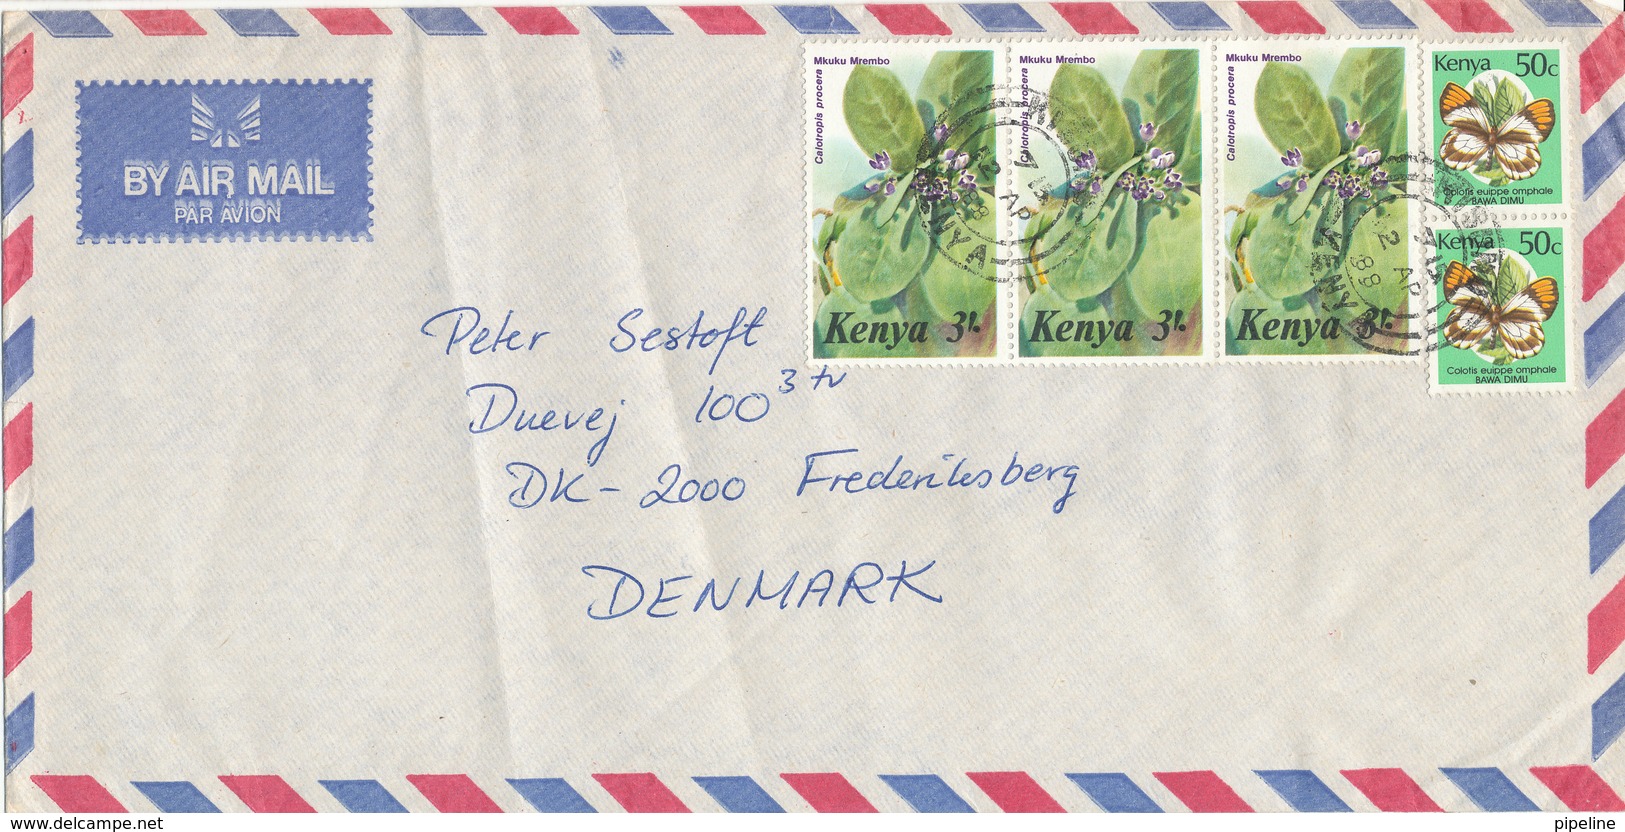 Kenya Air Mail Cover Sent To Denmark 12-4-1988 BUTTERFLY And FLOWERS On The Stamps - Kenya (1963-...)